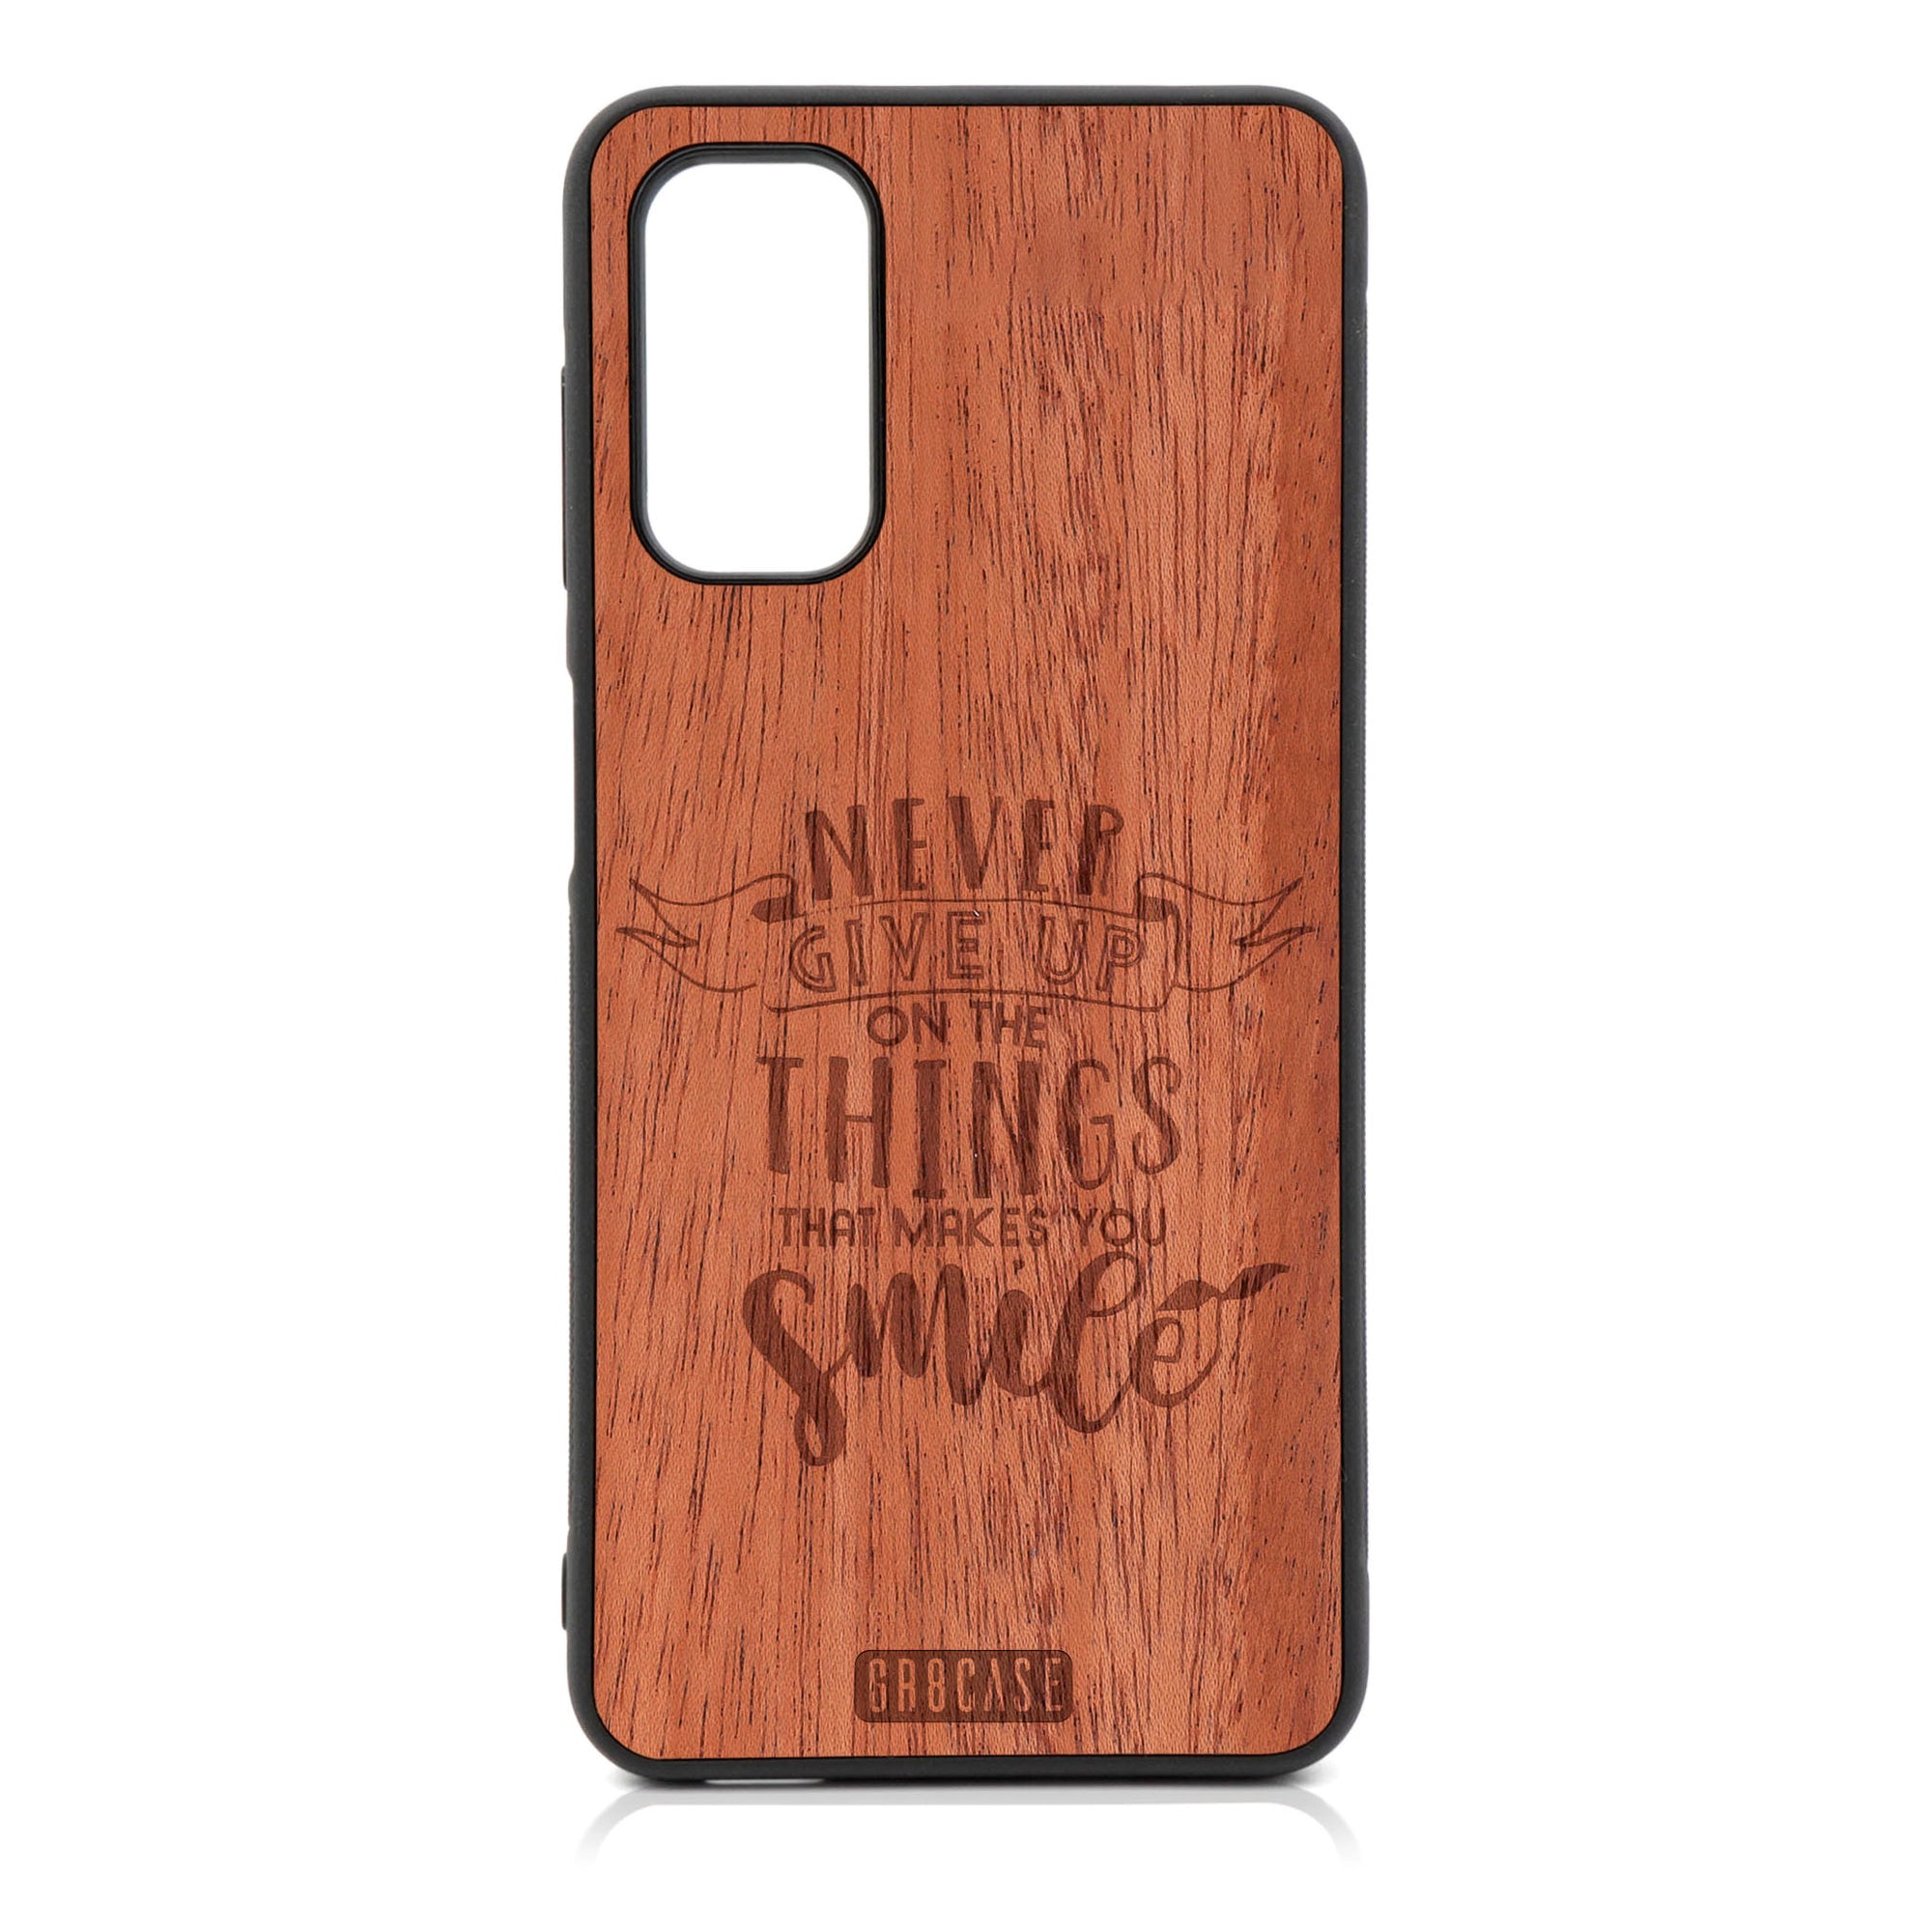 Never Give Up On The Things That Make You Smile Design Wood Case For Galaxy A13 5G